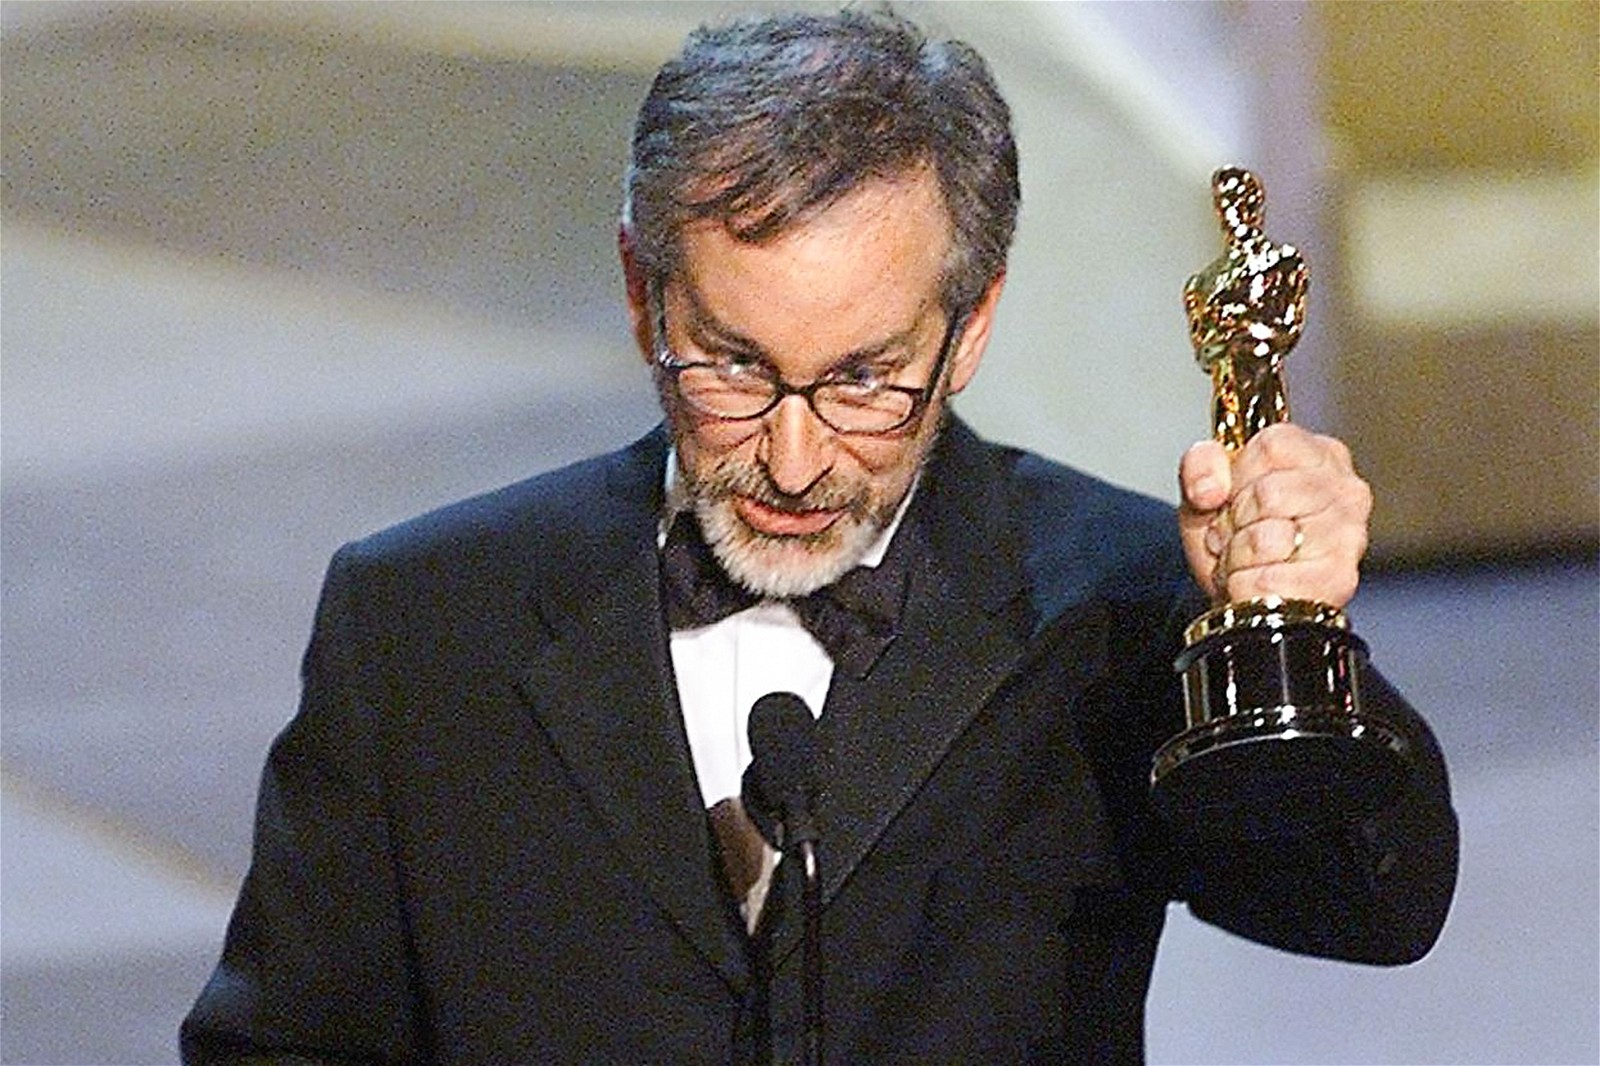 Steven Spielberg is the most thanked person in Oscar speeches